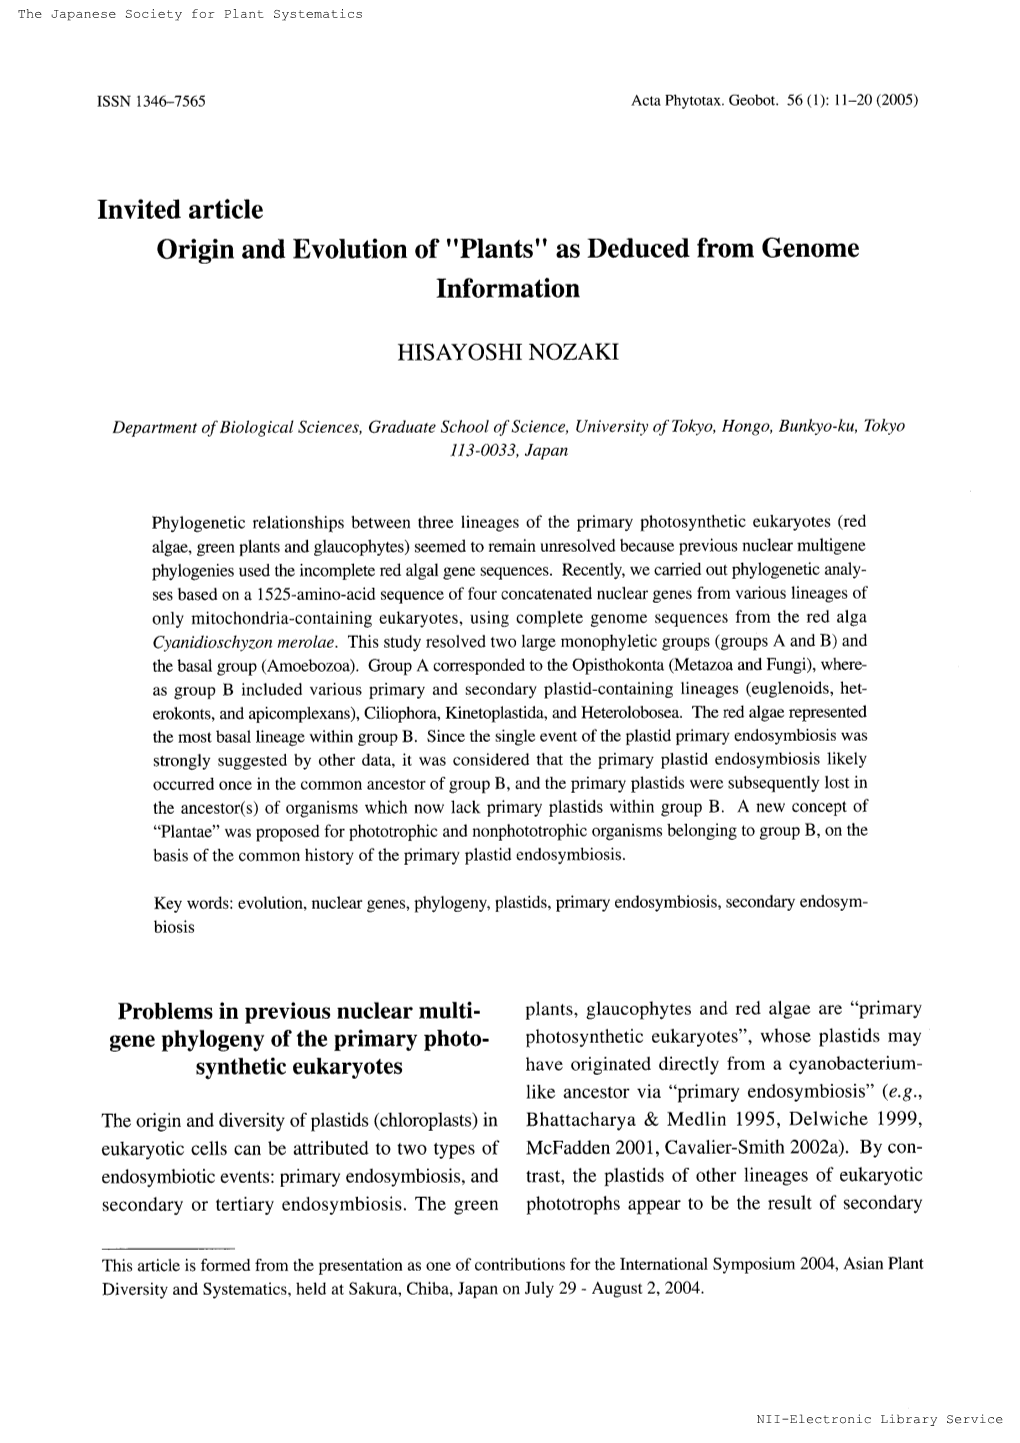 Invitedarticle As Deduced Information Fromgenome